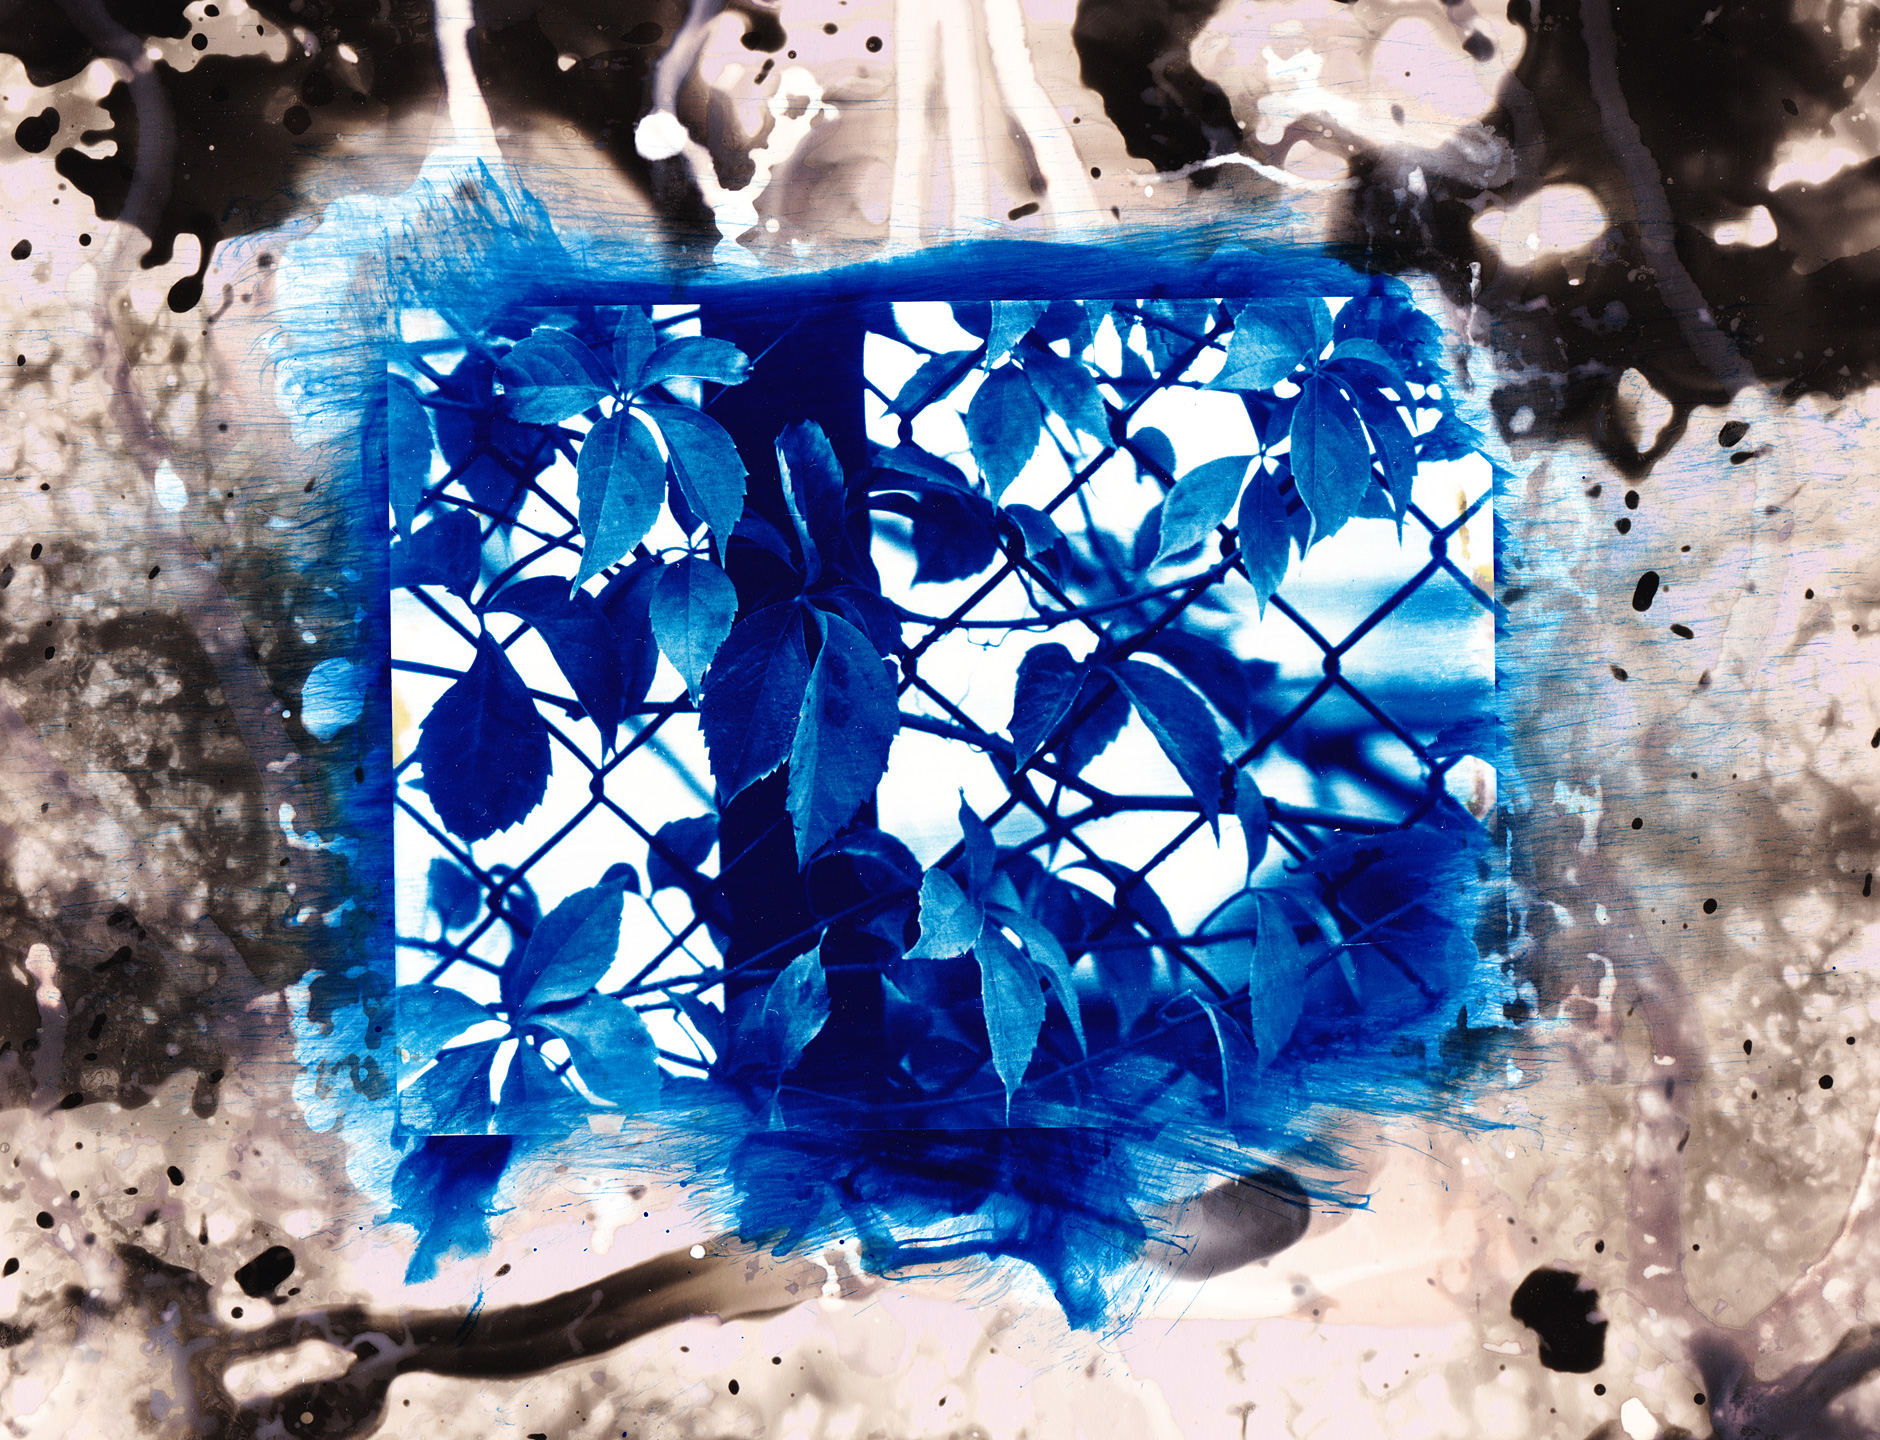 Cyanotype on paper image of a metal fence